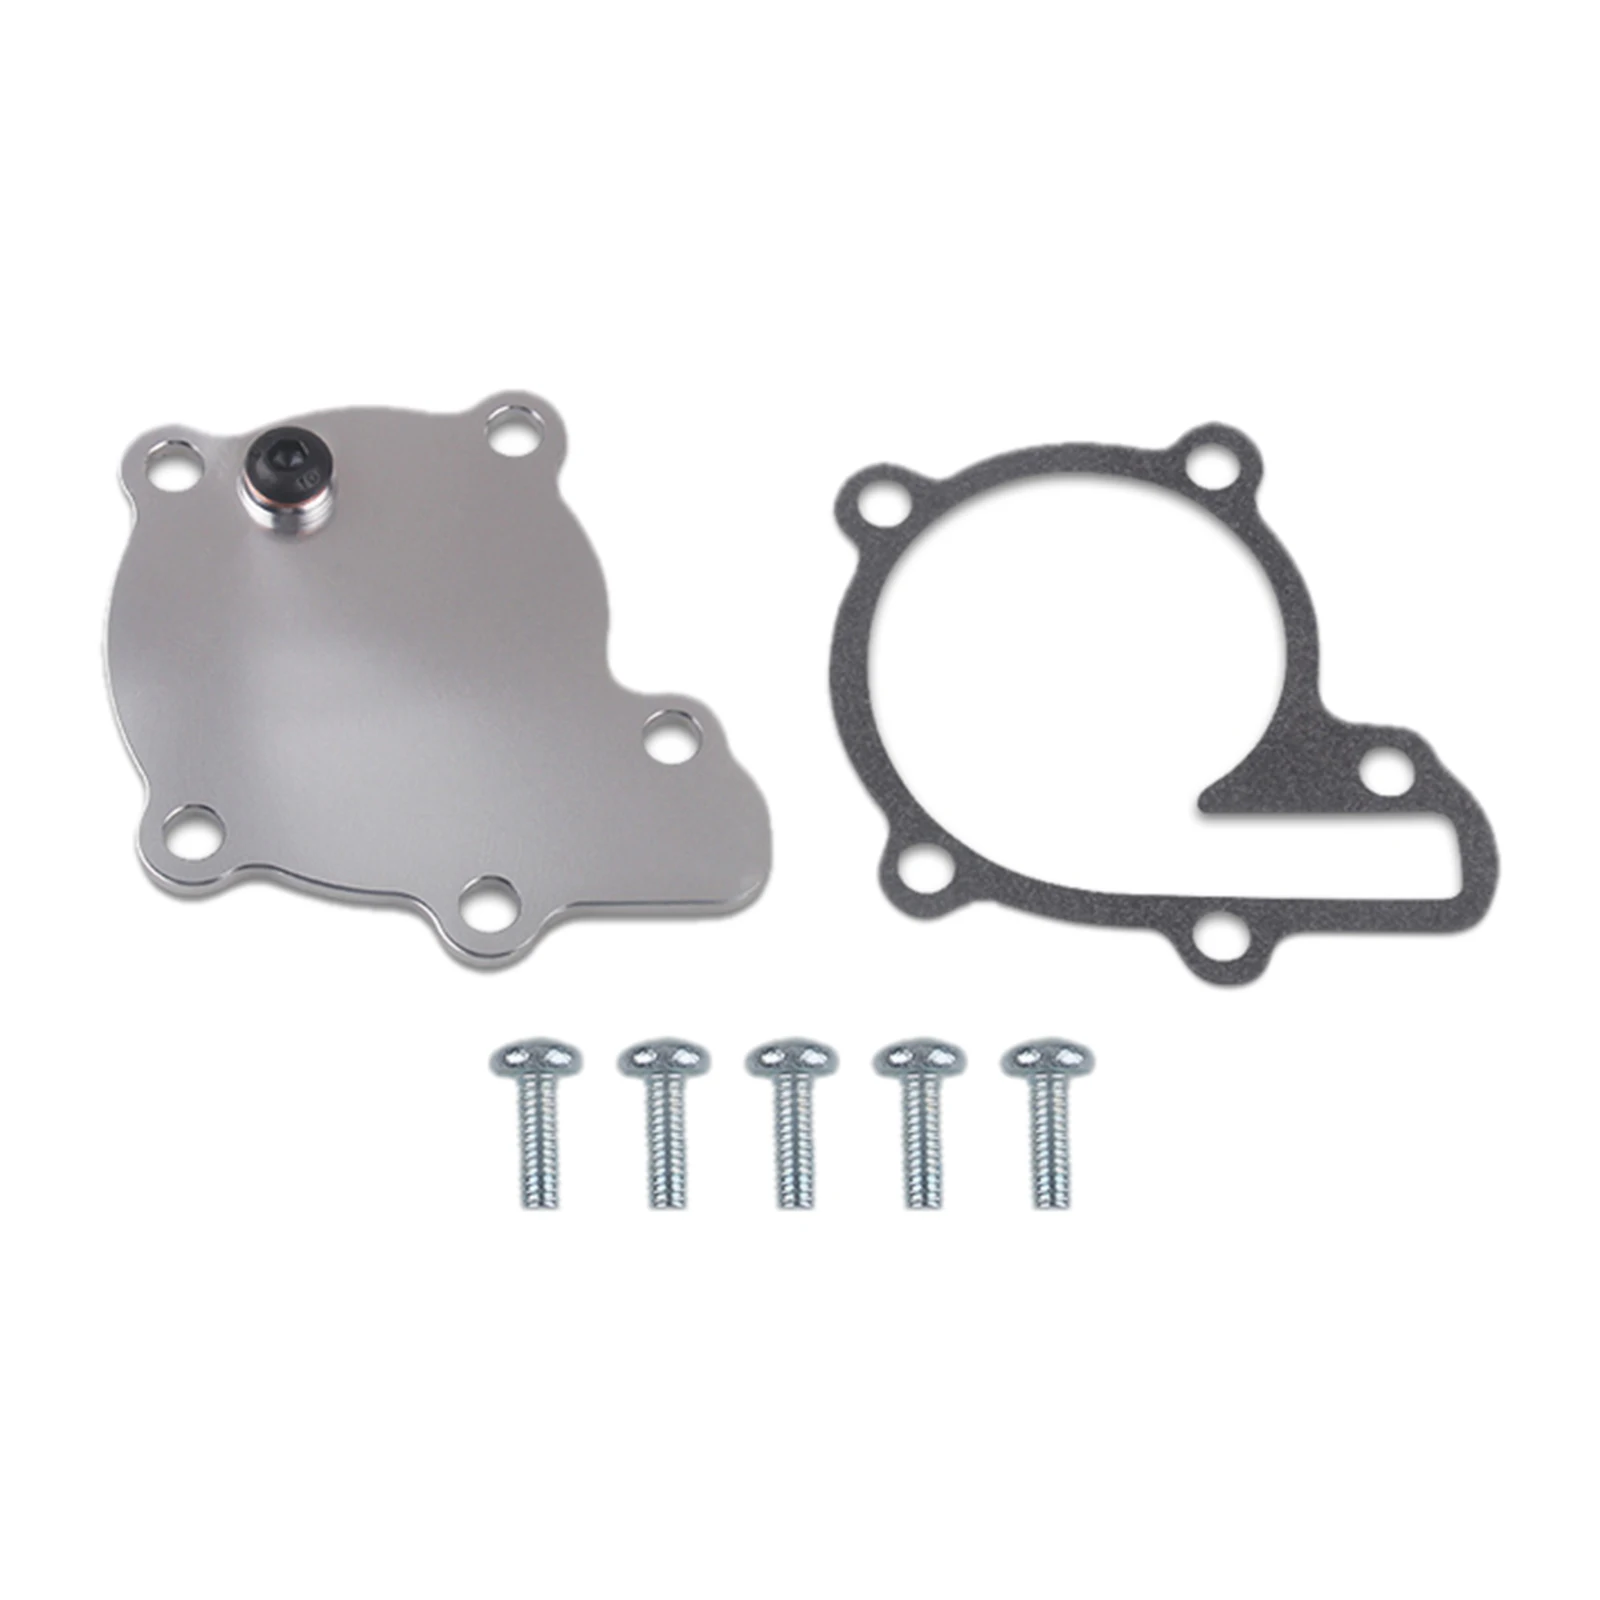 New Durable Coolant Water Pump Cover Housing for Yamaha Banshee 350 1987-2006 Accessories Replacement